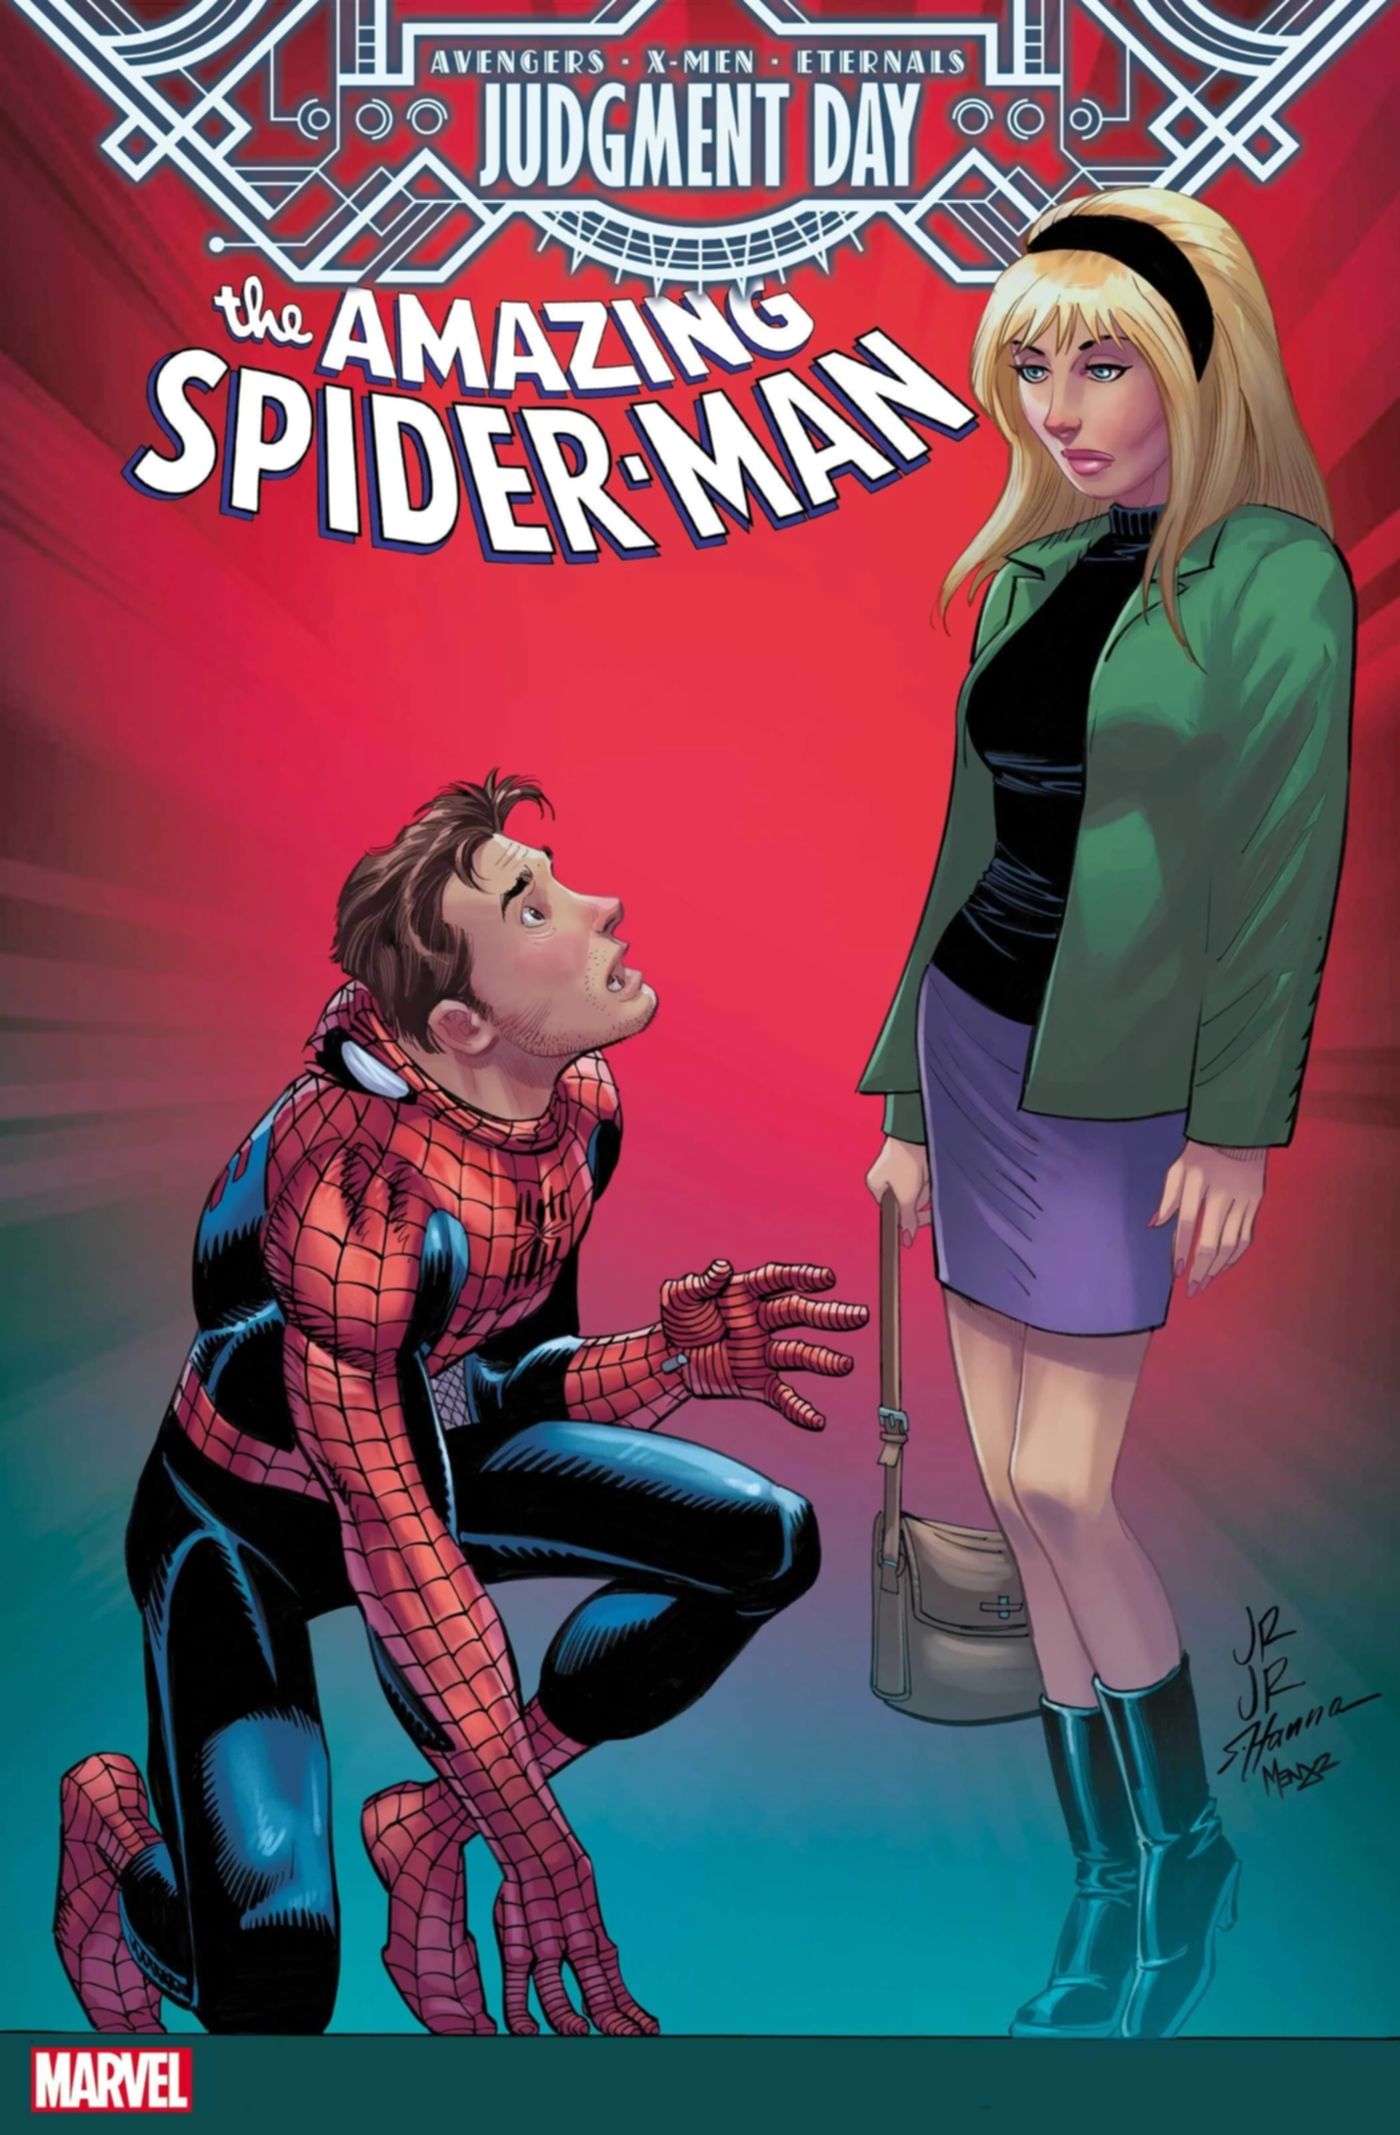 Gwen Stacy Returns To Spider-Man in Marvel’s Judgment Day Event